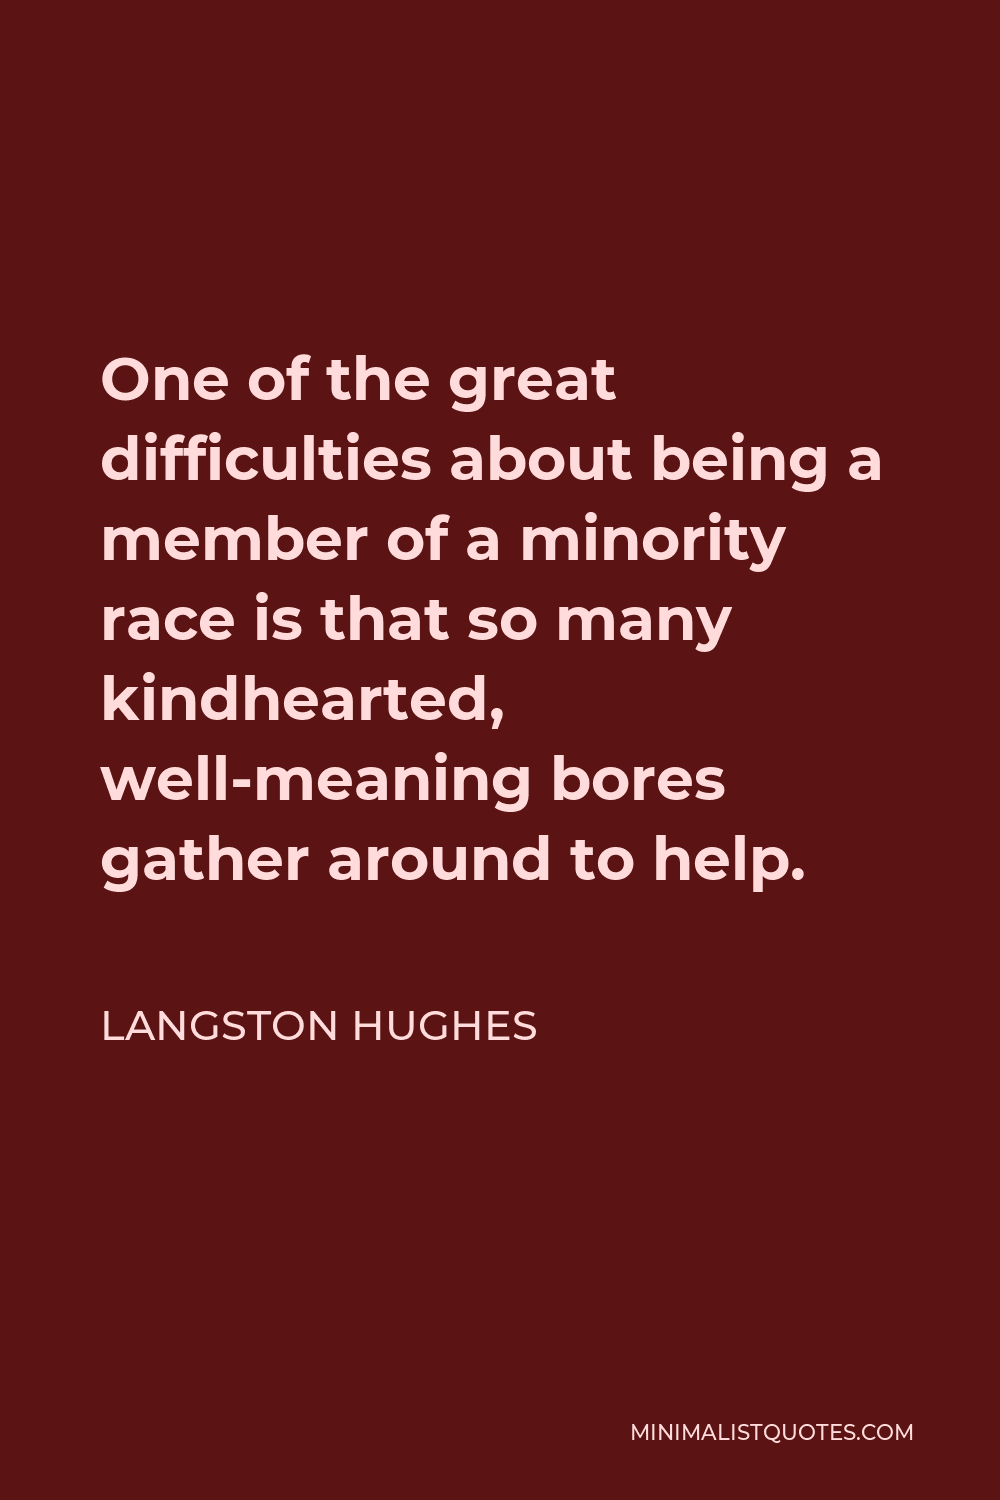 Langston Hughes Quote - One of the great difficulties about being a member of a minority race is that so many kindhearted, well-meaning bores gather around to help.